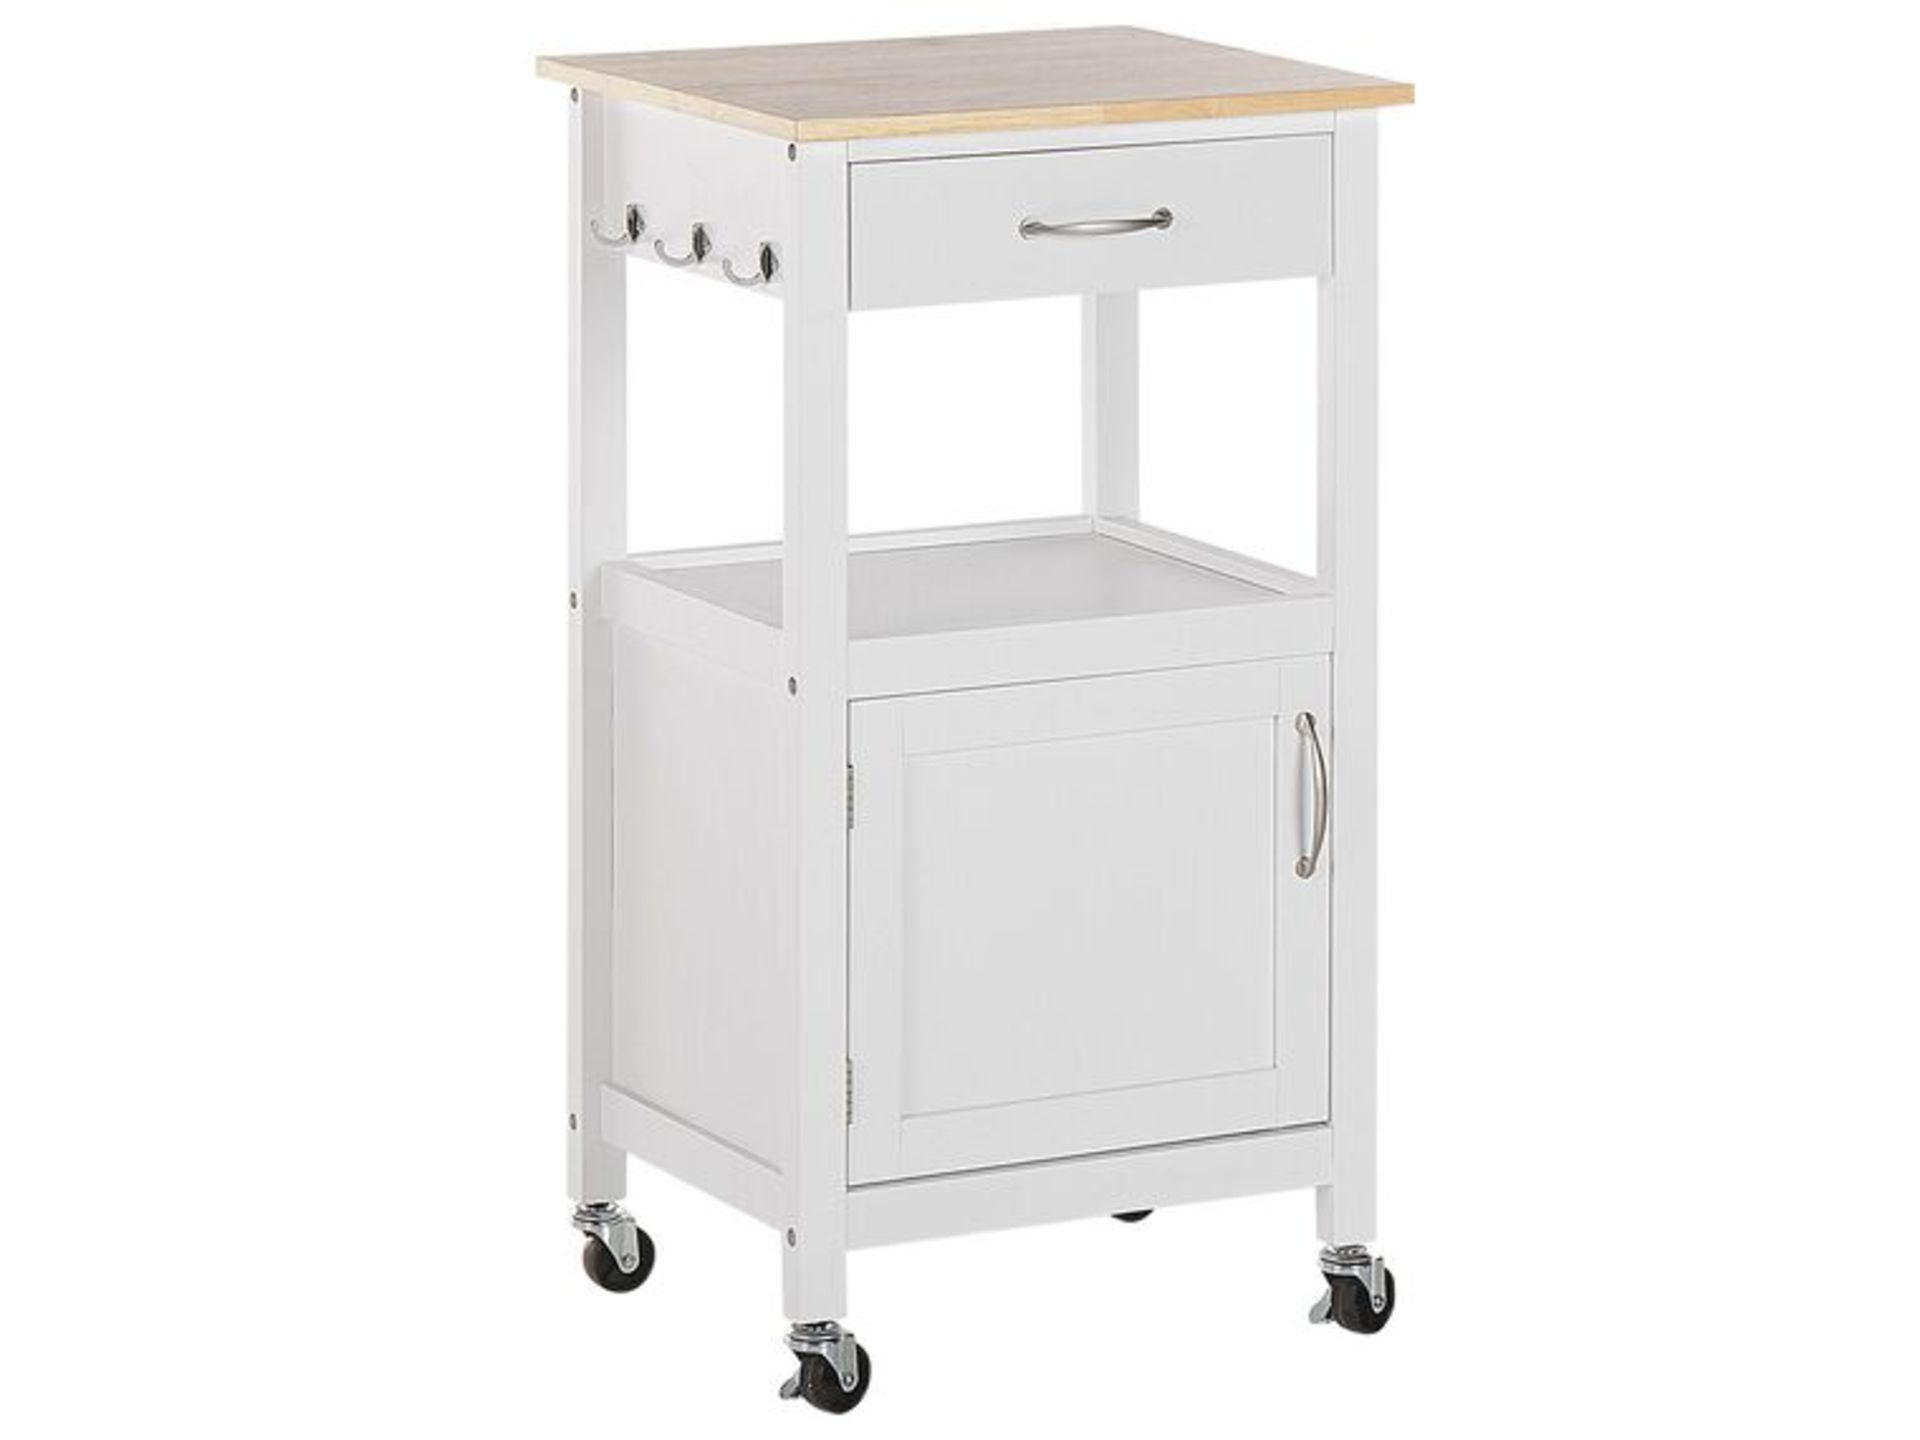 Kitchen Storage Trolley White. - SR6U. Multifunctional trolley in a modern style that suits in a